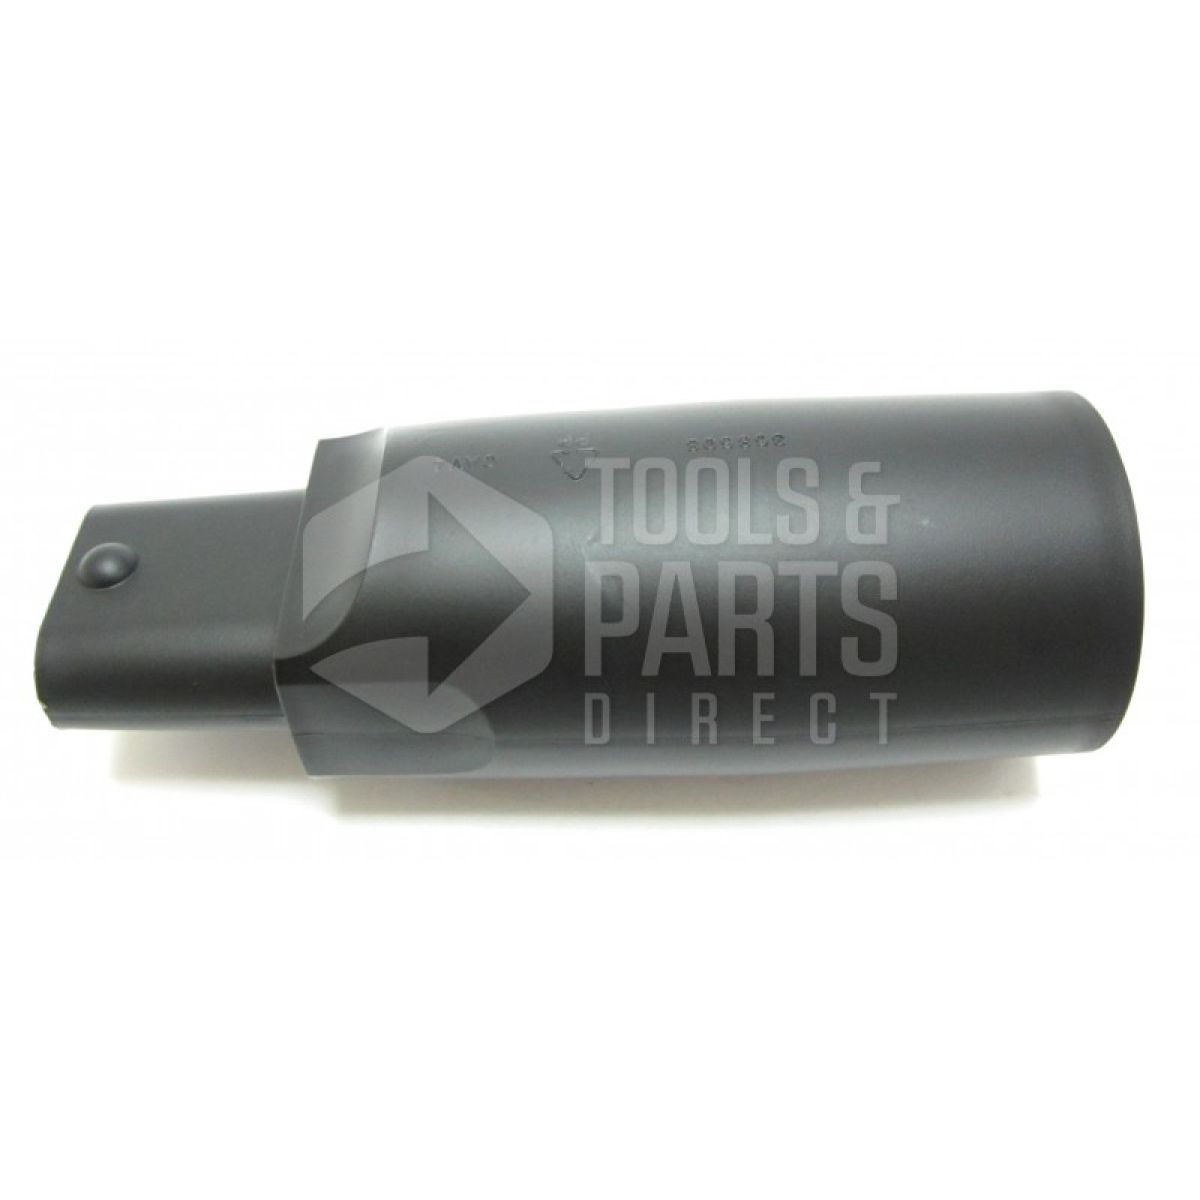 https://toolsandpartsdirect.co.uk/image-factory/739df36146a17d0c46a138ddc17f23bffa664036~1200x1200/images/products/C7Ra2dxqSAZKBjeykiY6DjlGWfvjaREnPxyyPfpT.jpg